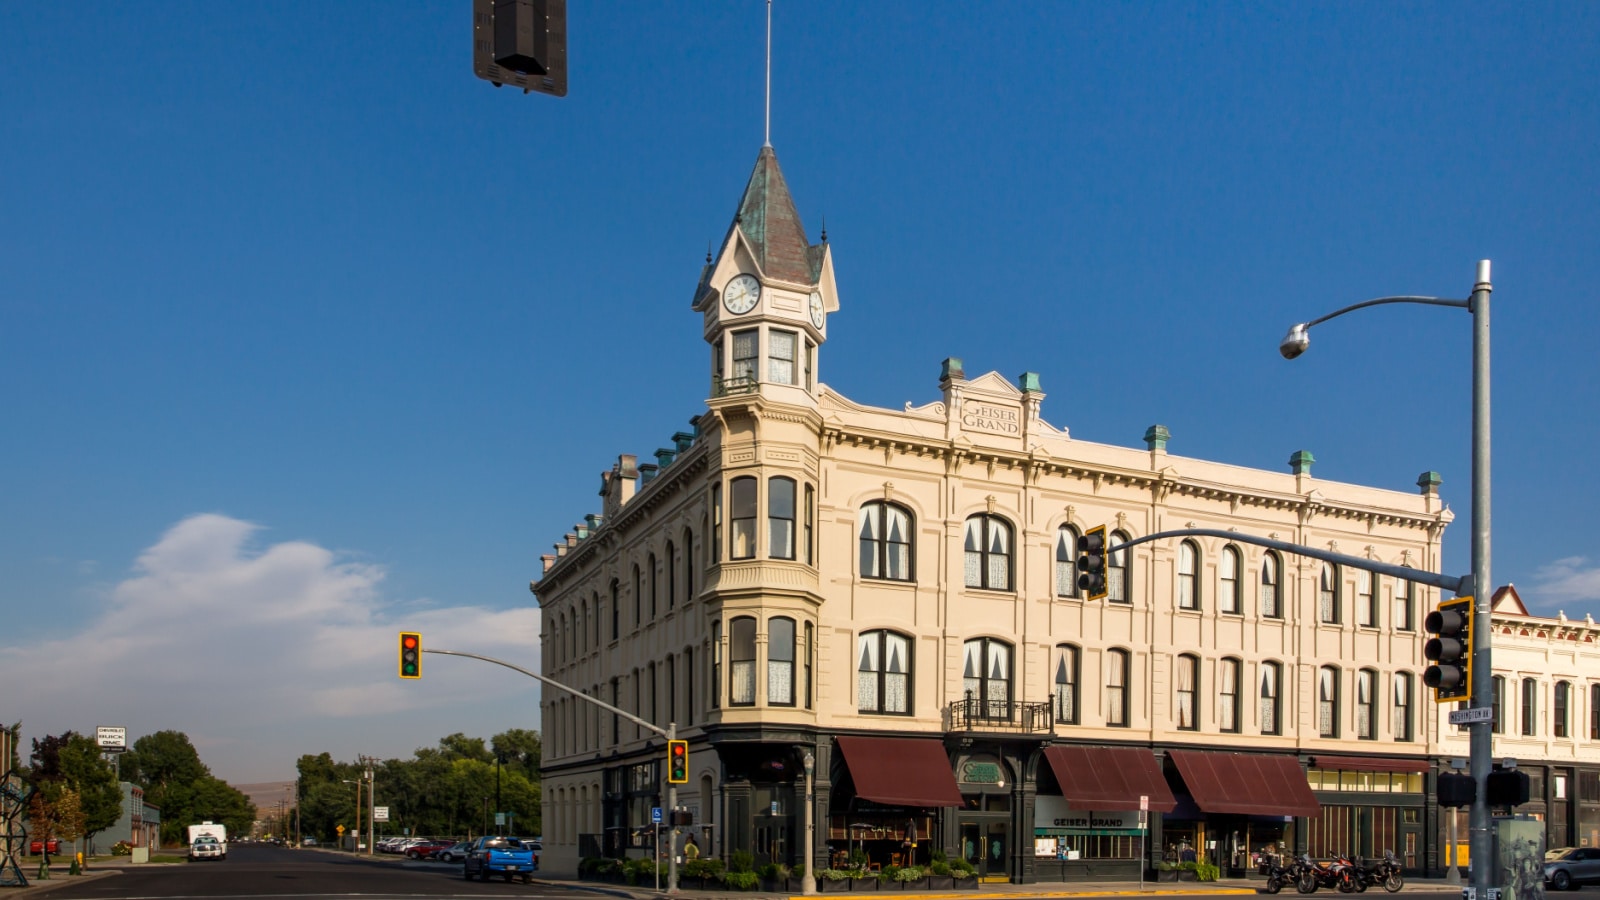 Baker City, Oregon, USA - August 29th, 2020: Geiser Grand Hotel and Restaurant building in the city center